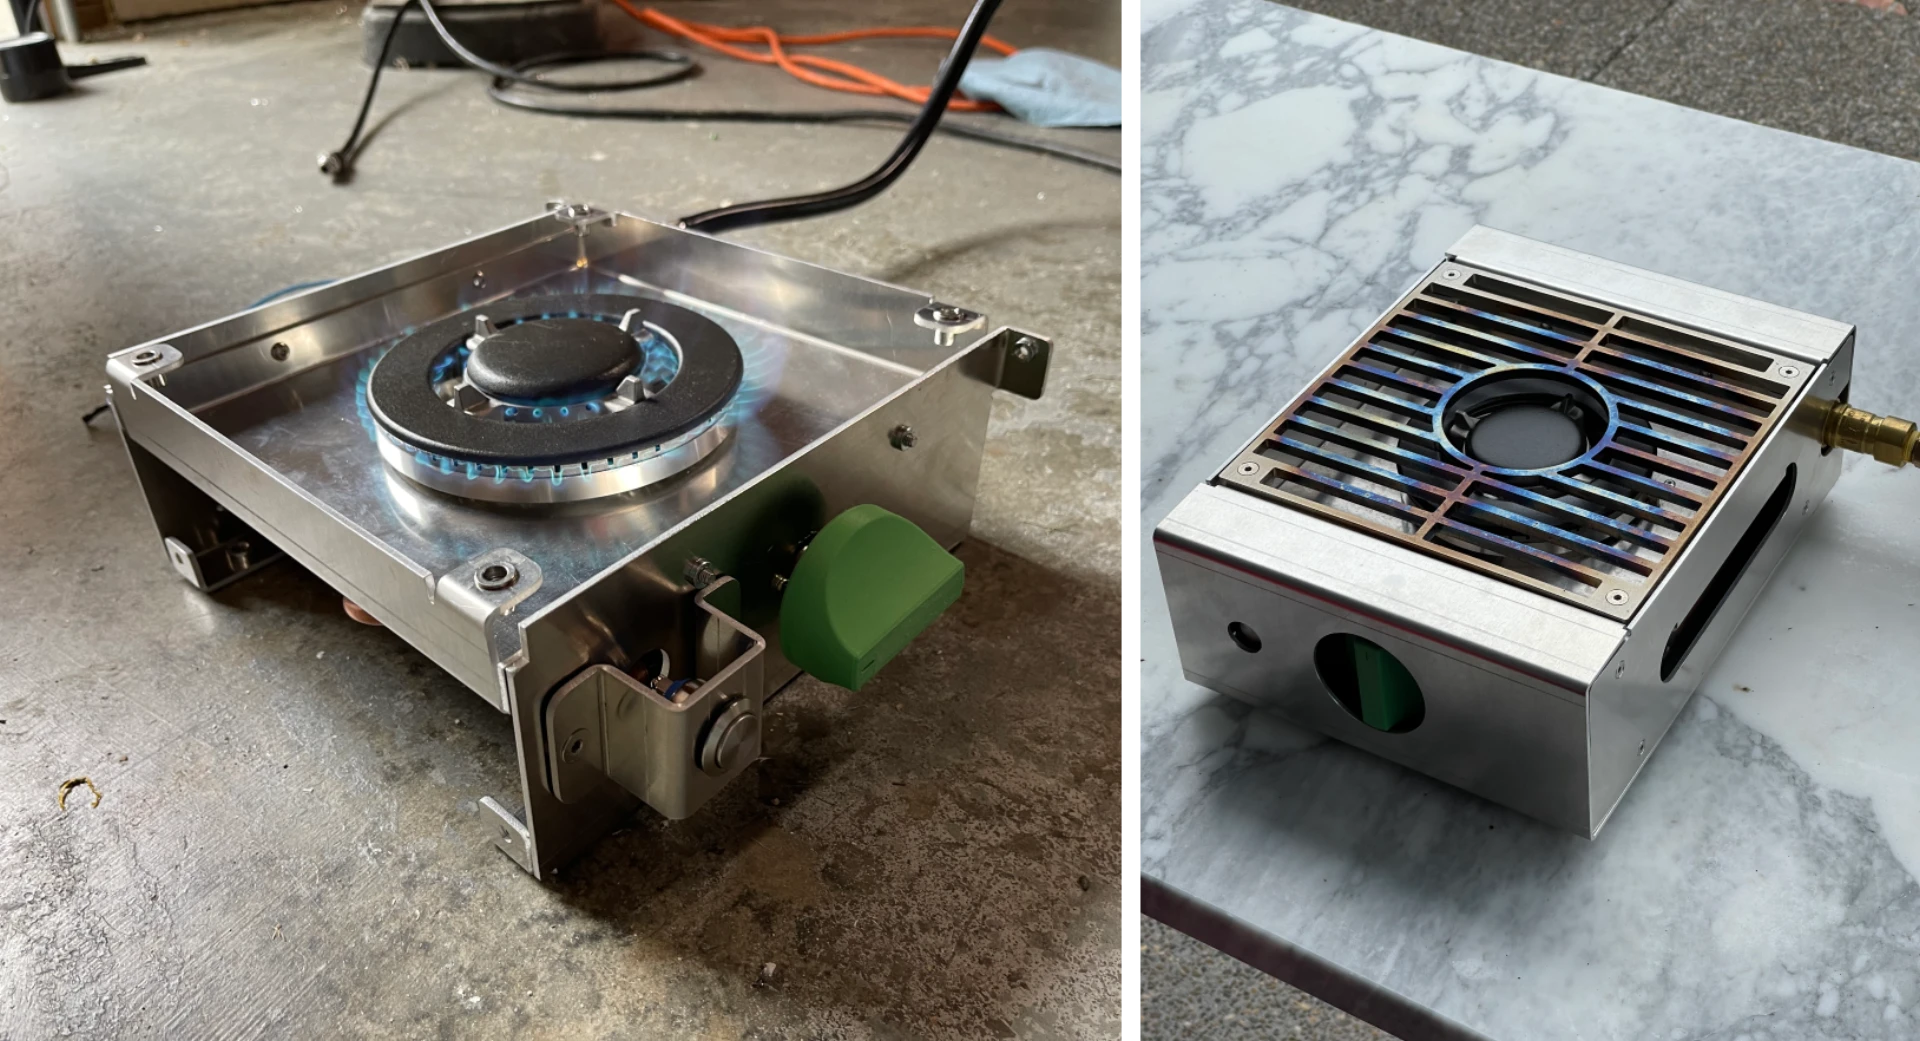 real images of single burner prototype, showing working burner and assembly